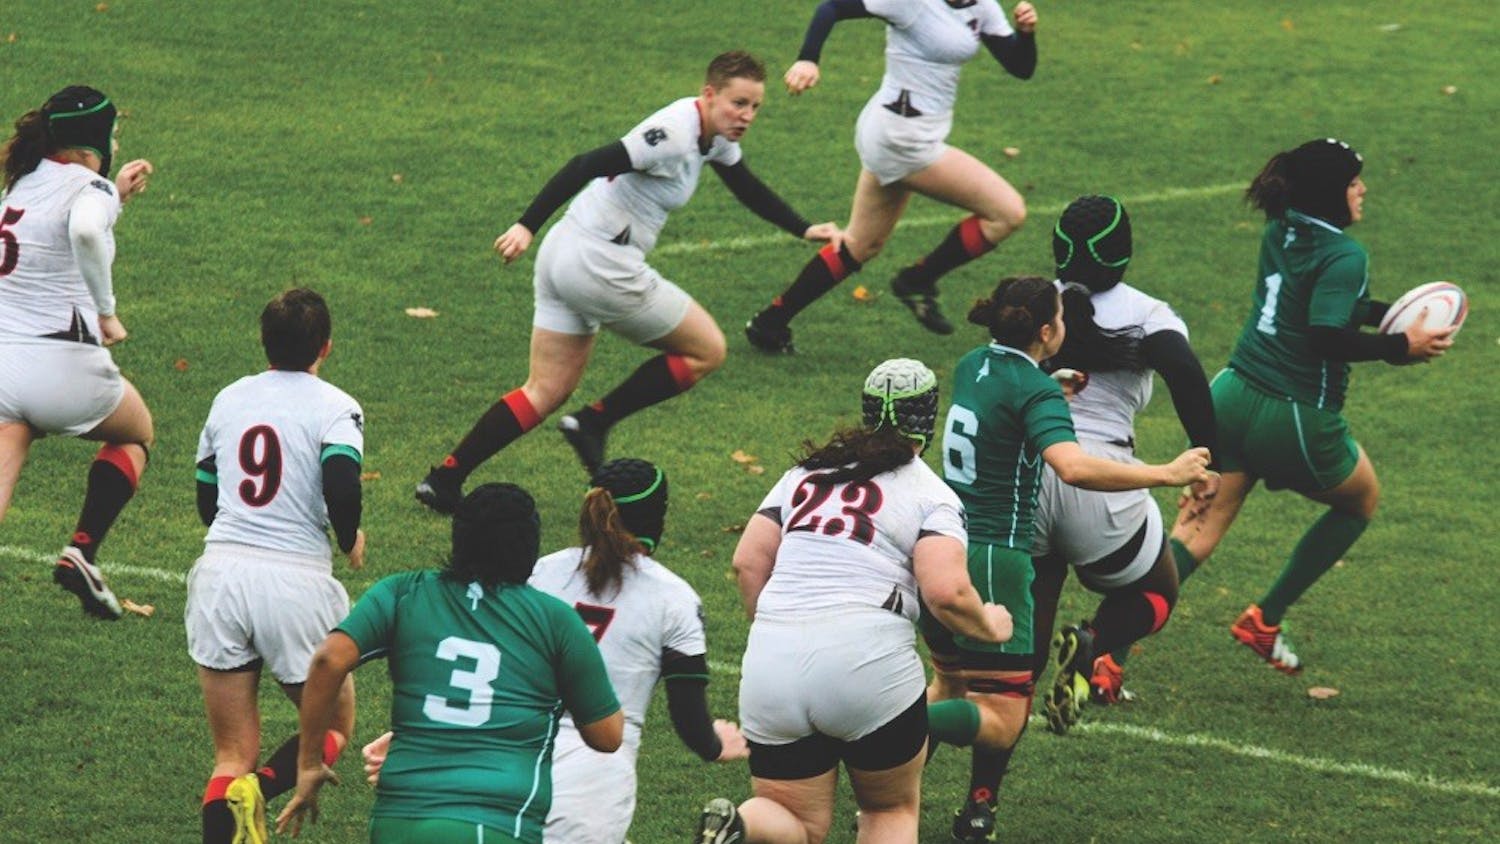 The women’s rugby team bests American International College 53-17 to go 5-0 on the season.